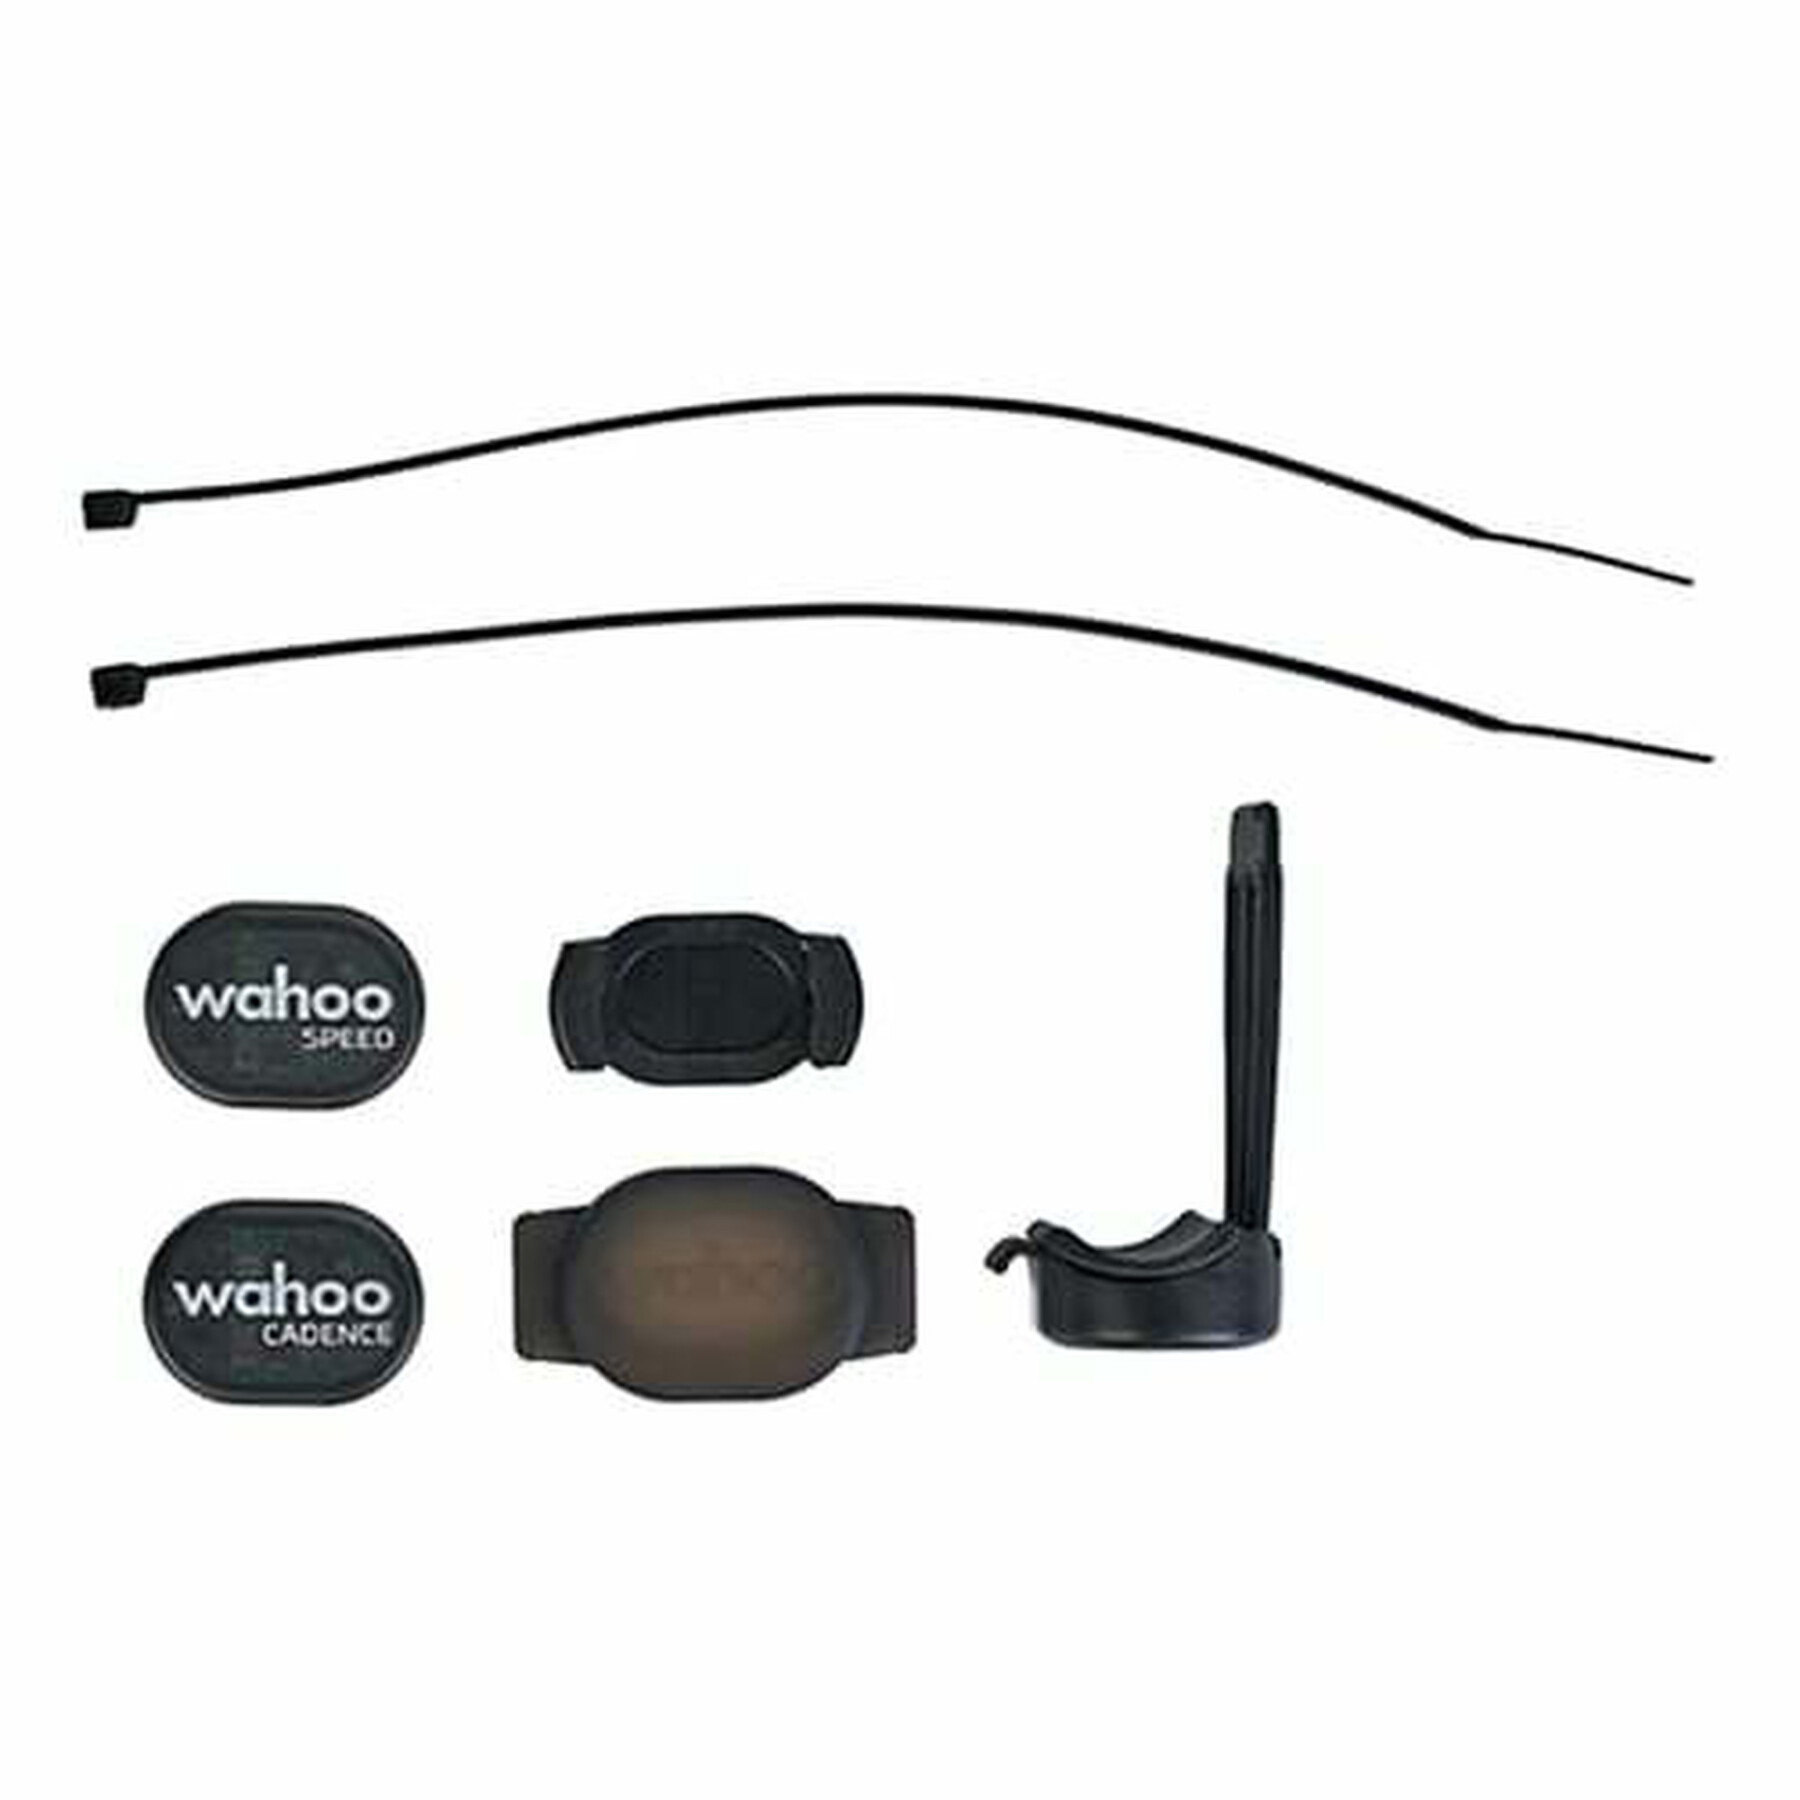 Speed and cadence sensor combo pack Wahoo RPM bt-ant+